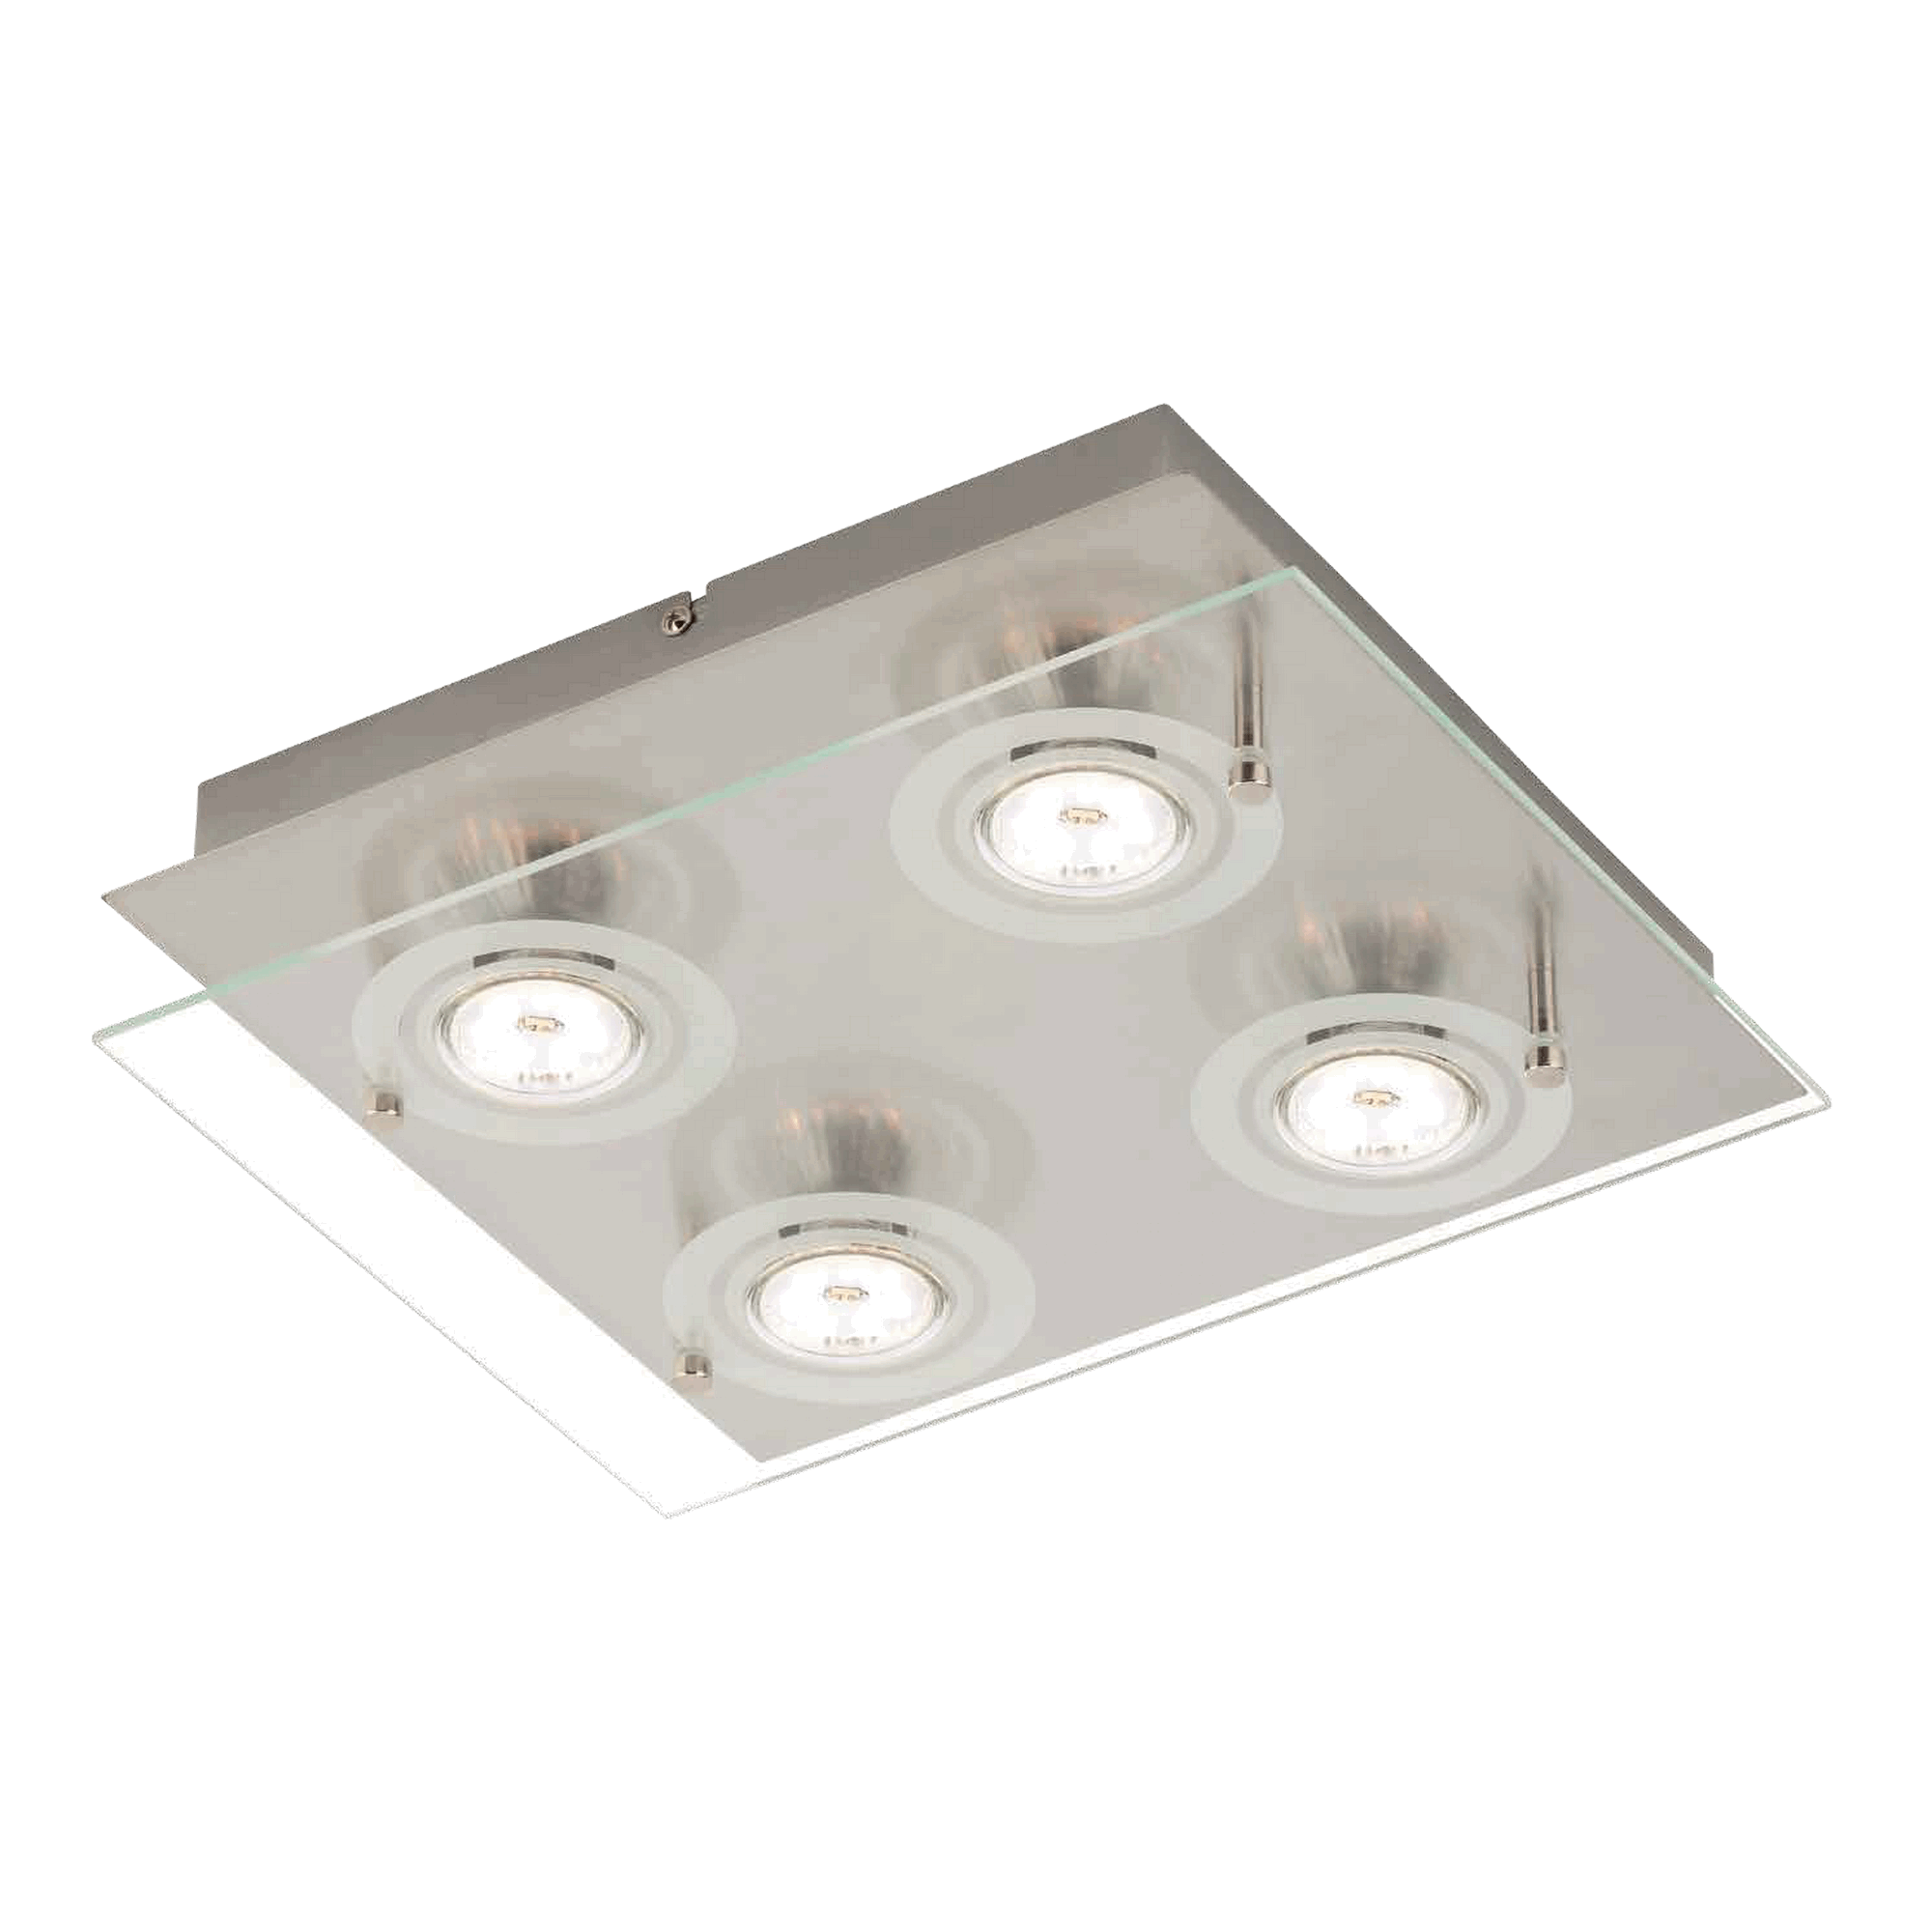 LED-Wohnraumstrahler 'Leonie' 4-flammig 350 lm + product picture